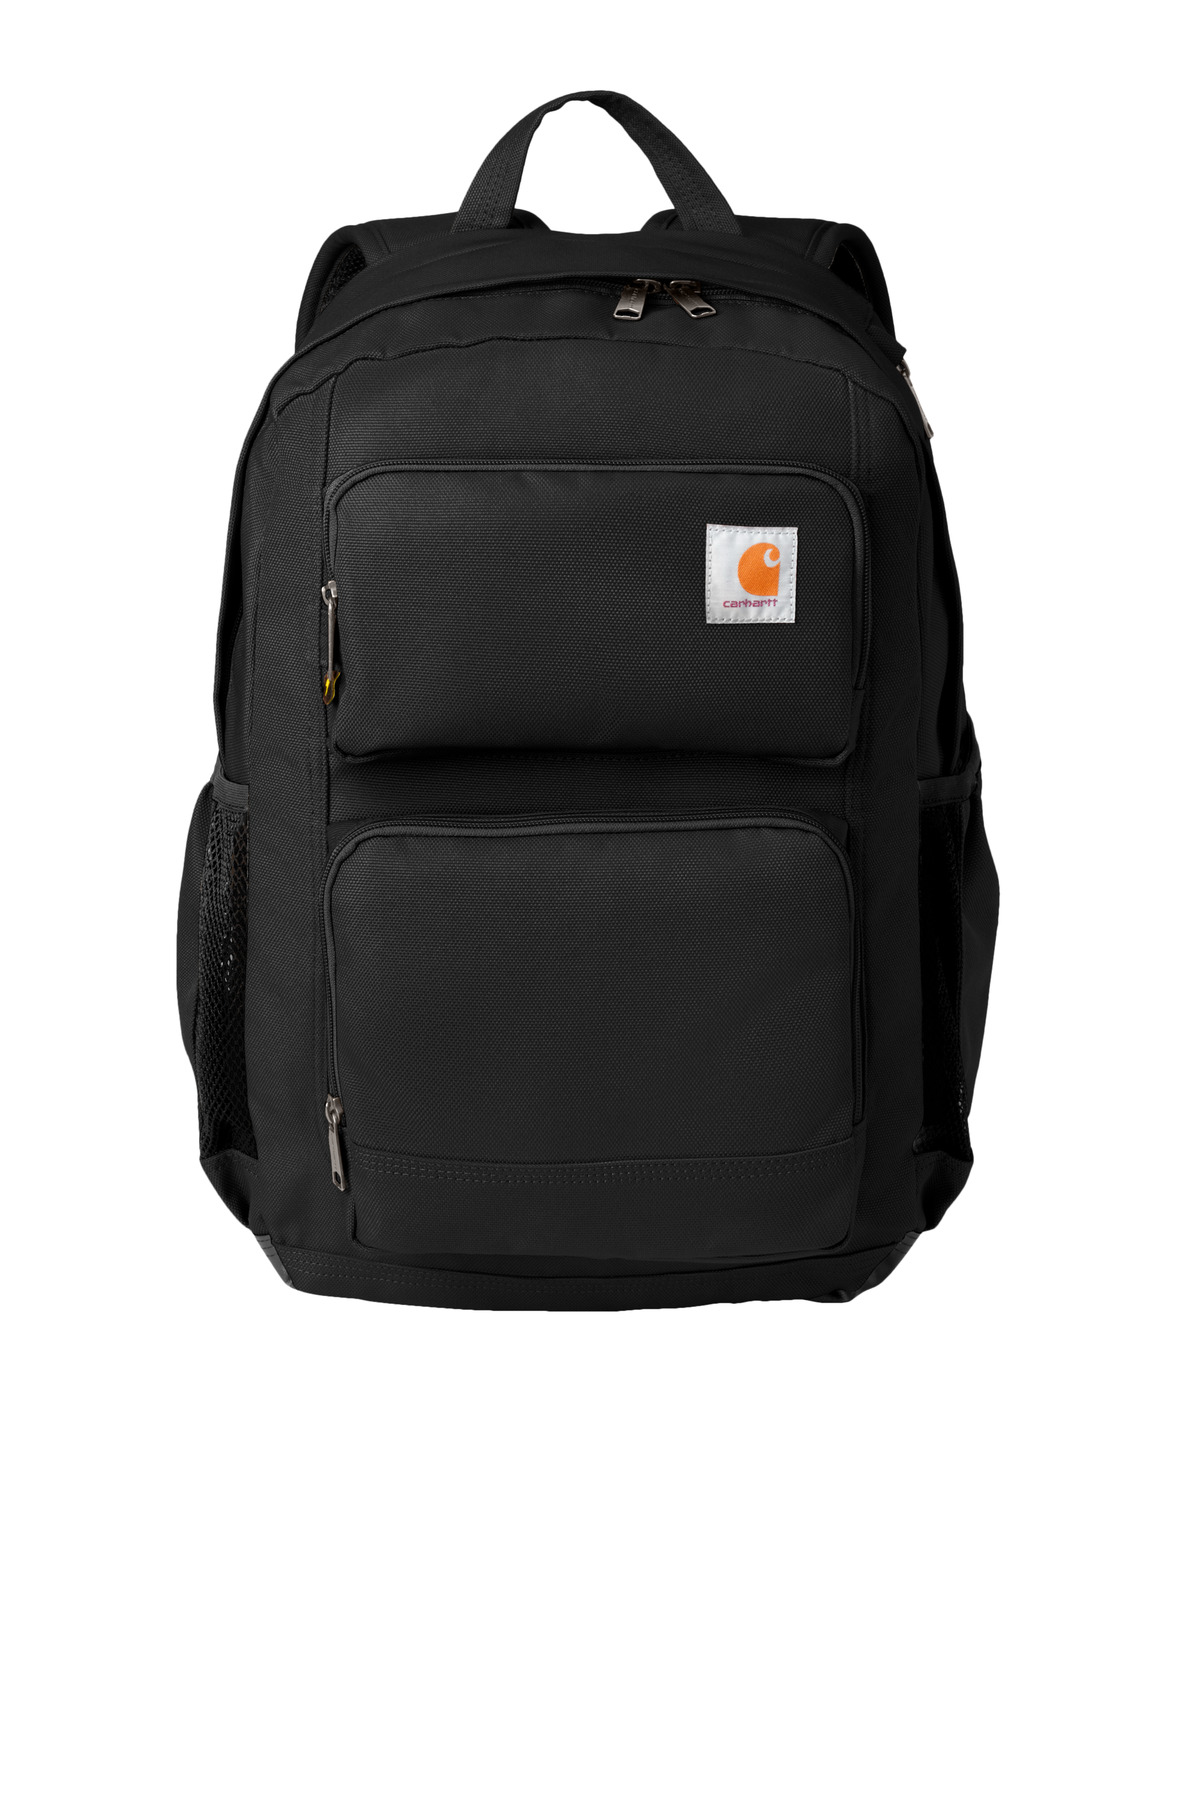 Carhartt 28L Foundry Series Dual-Compartment Backpack-Carhartt